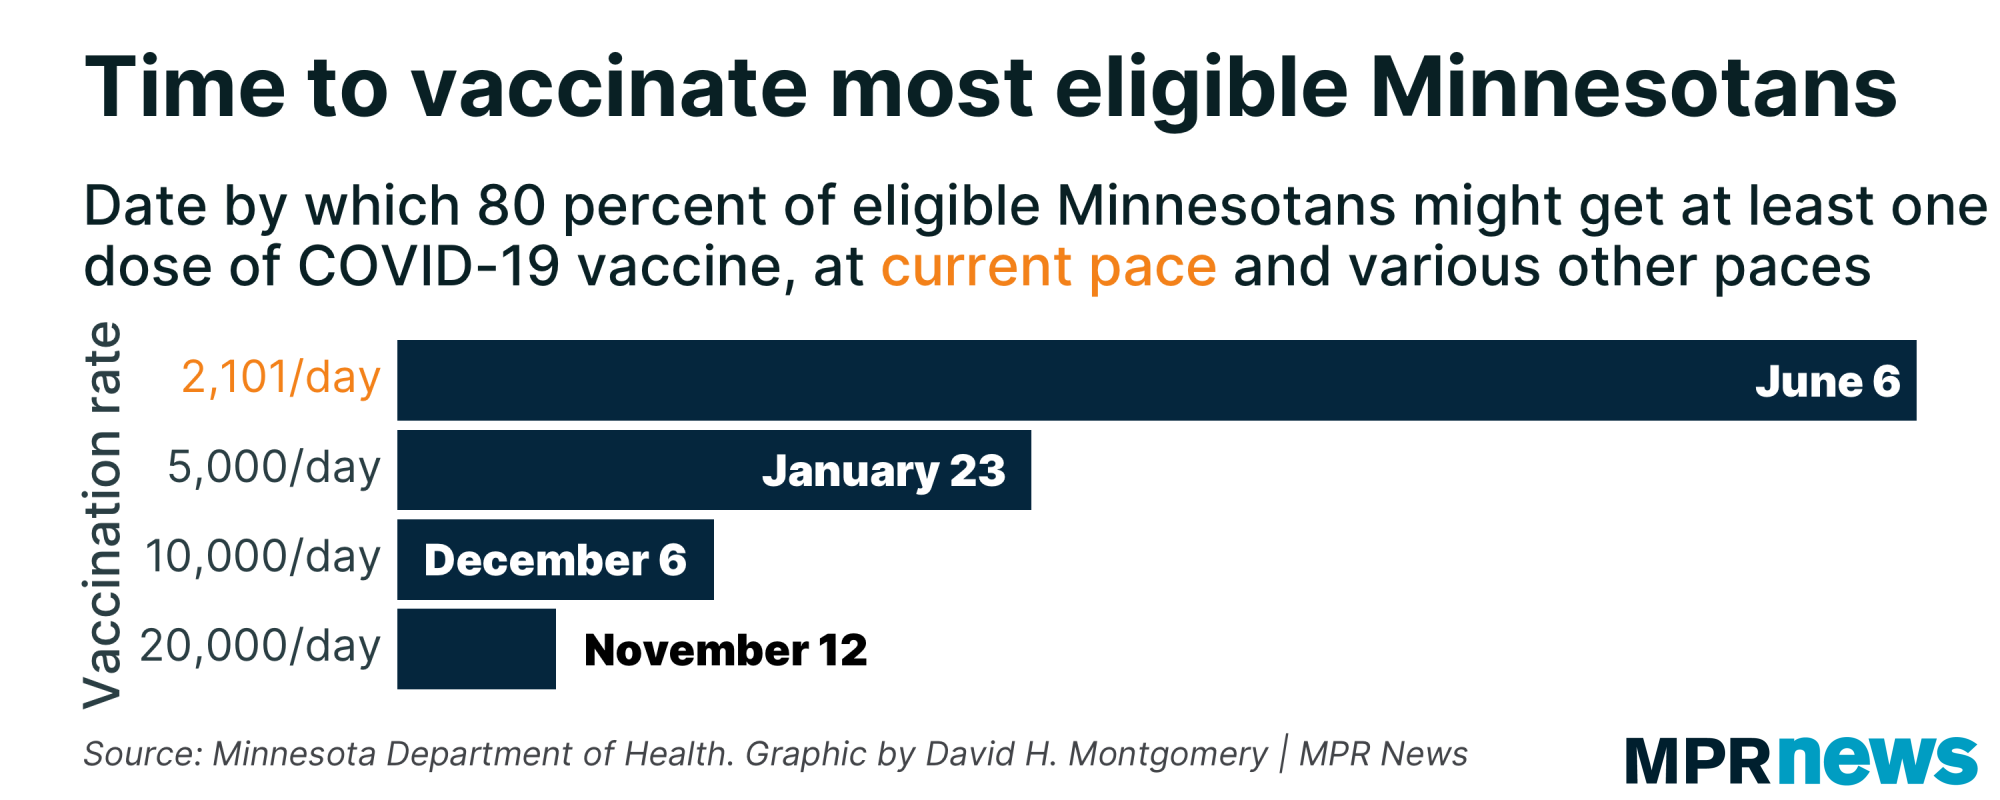 Graph of the time to vaccinate 80 percent of eligible Minnesotans